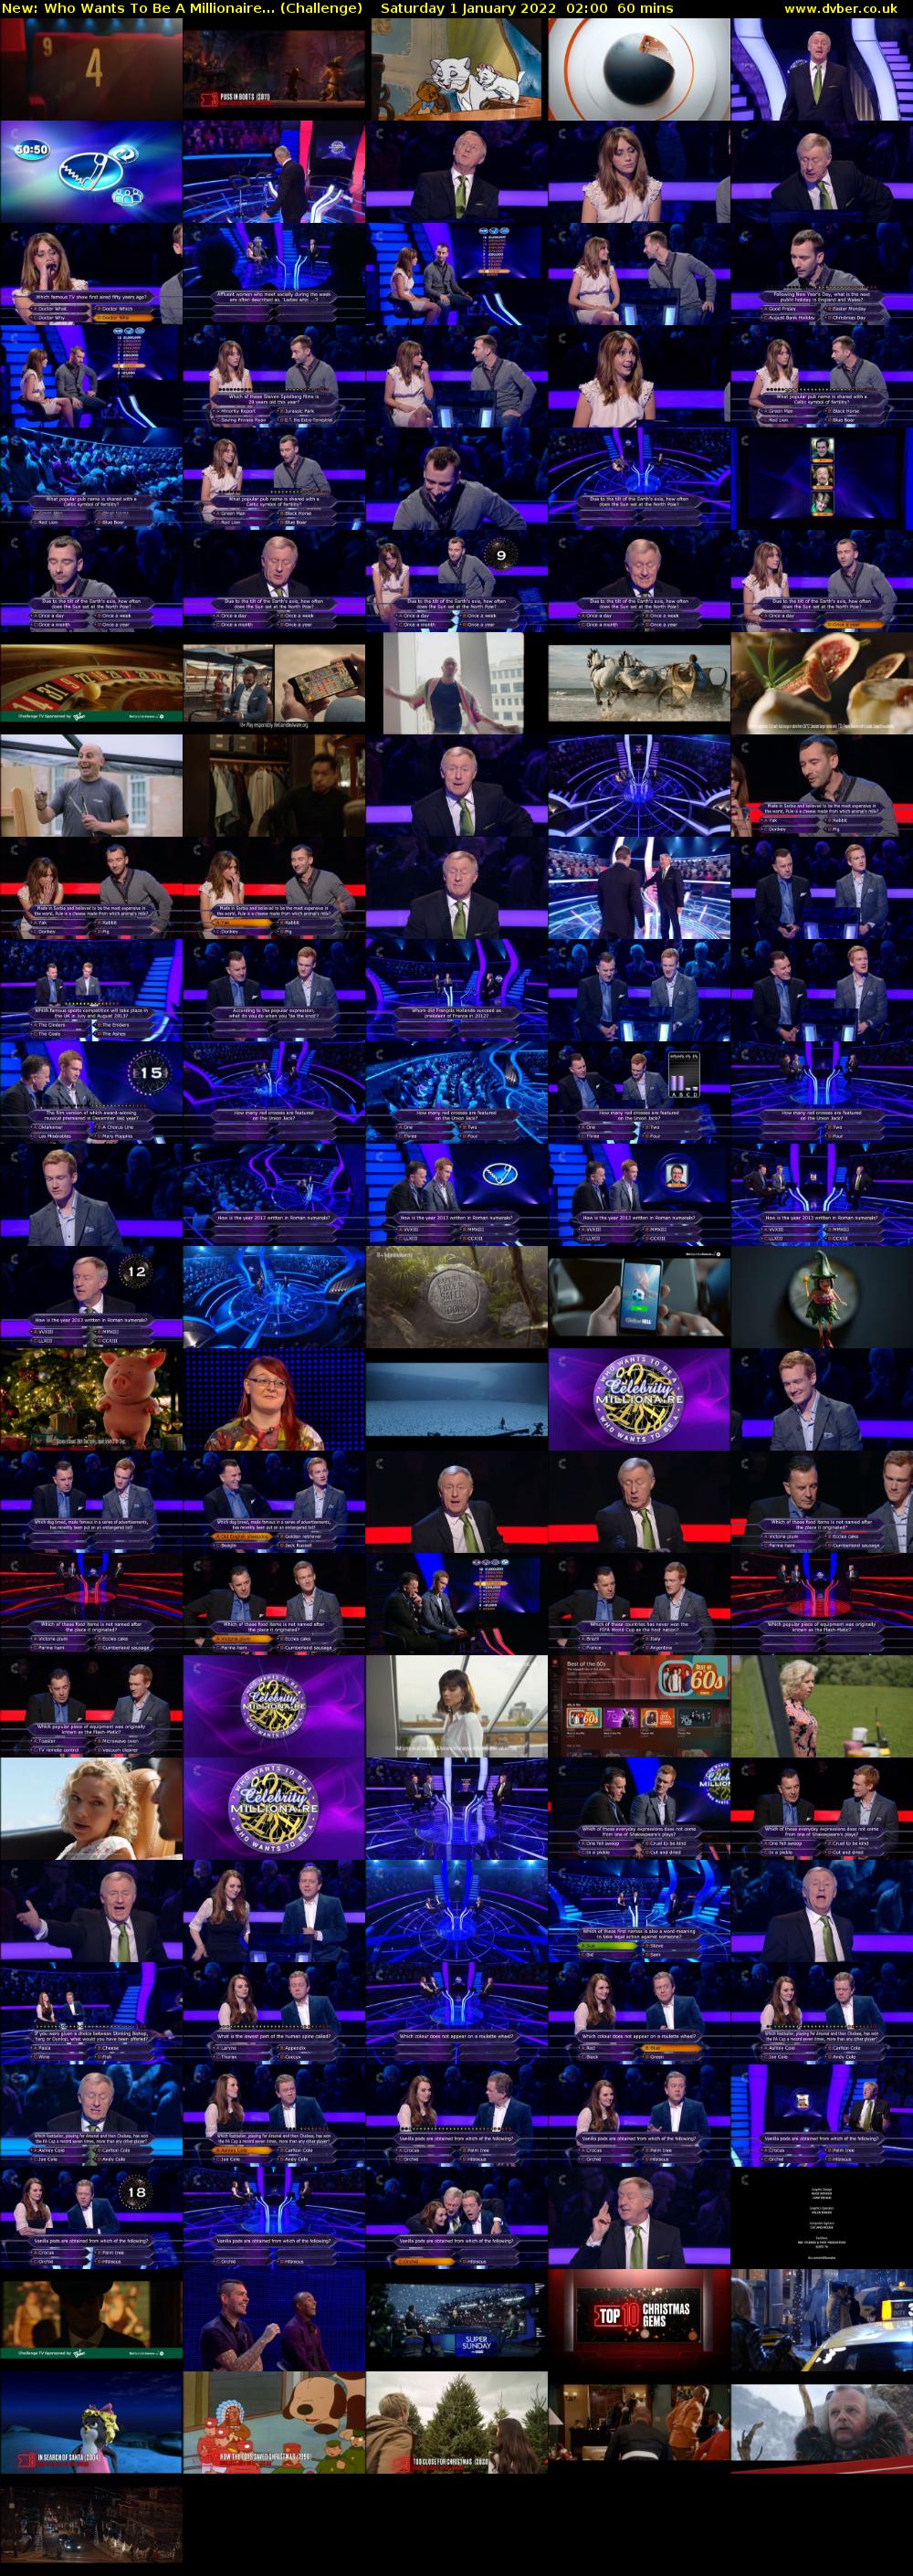 Who Wants To Be A Millionaire... (Challenge) Saturday 1 January 2022 02:00 - 03:00